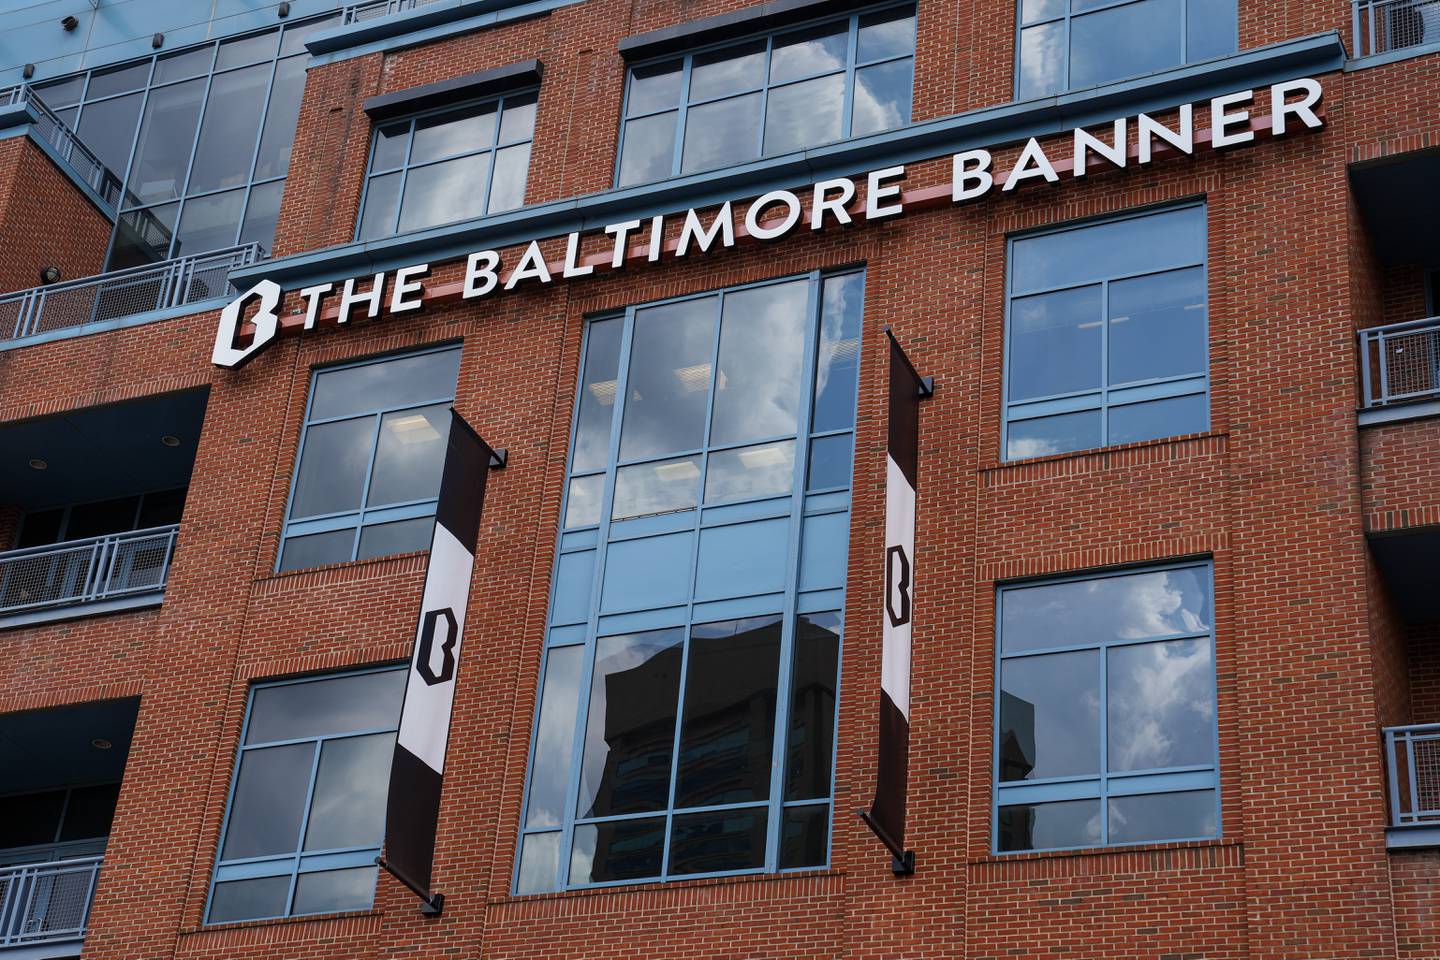 6/8/22—Exterior of The Baltimore Banner office sign with the hanging banners.